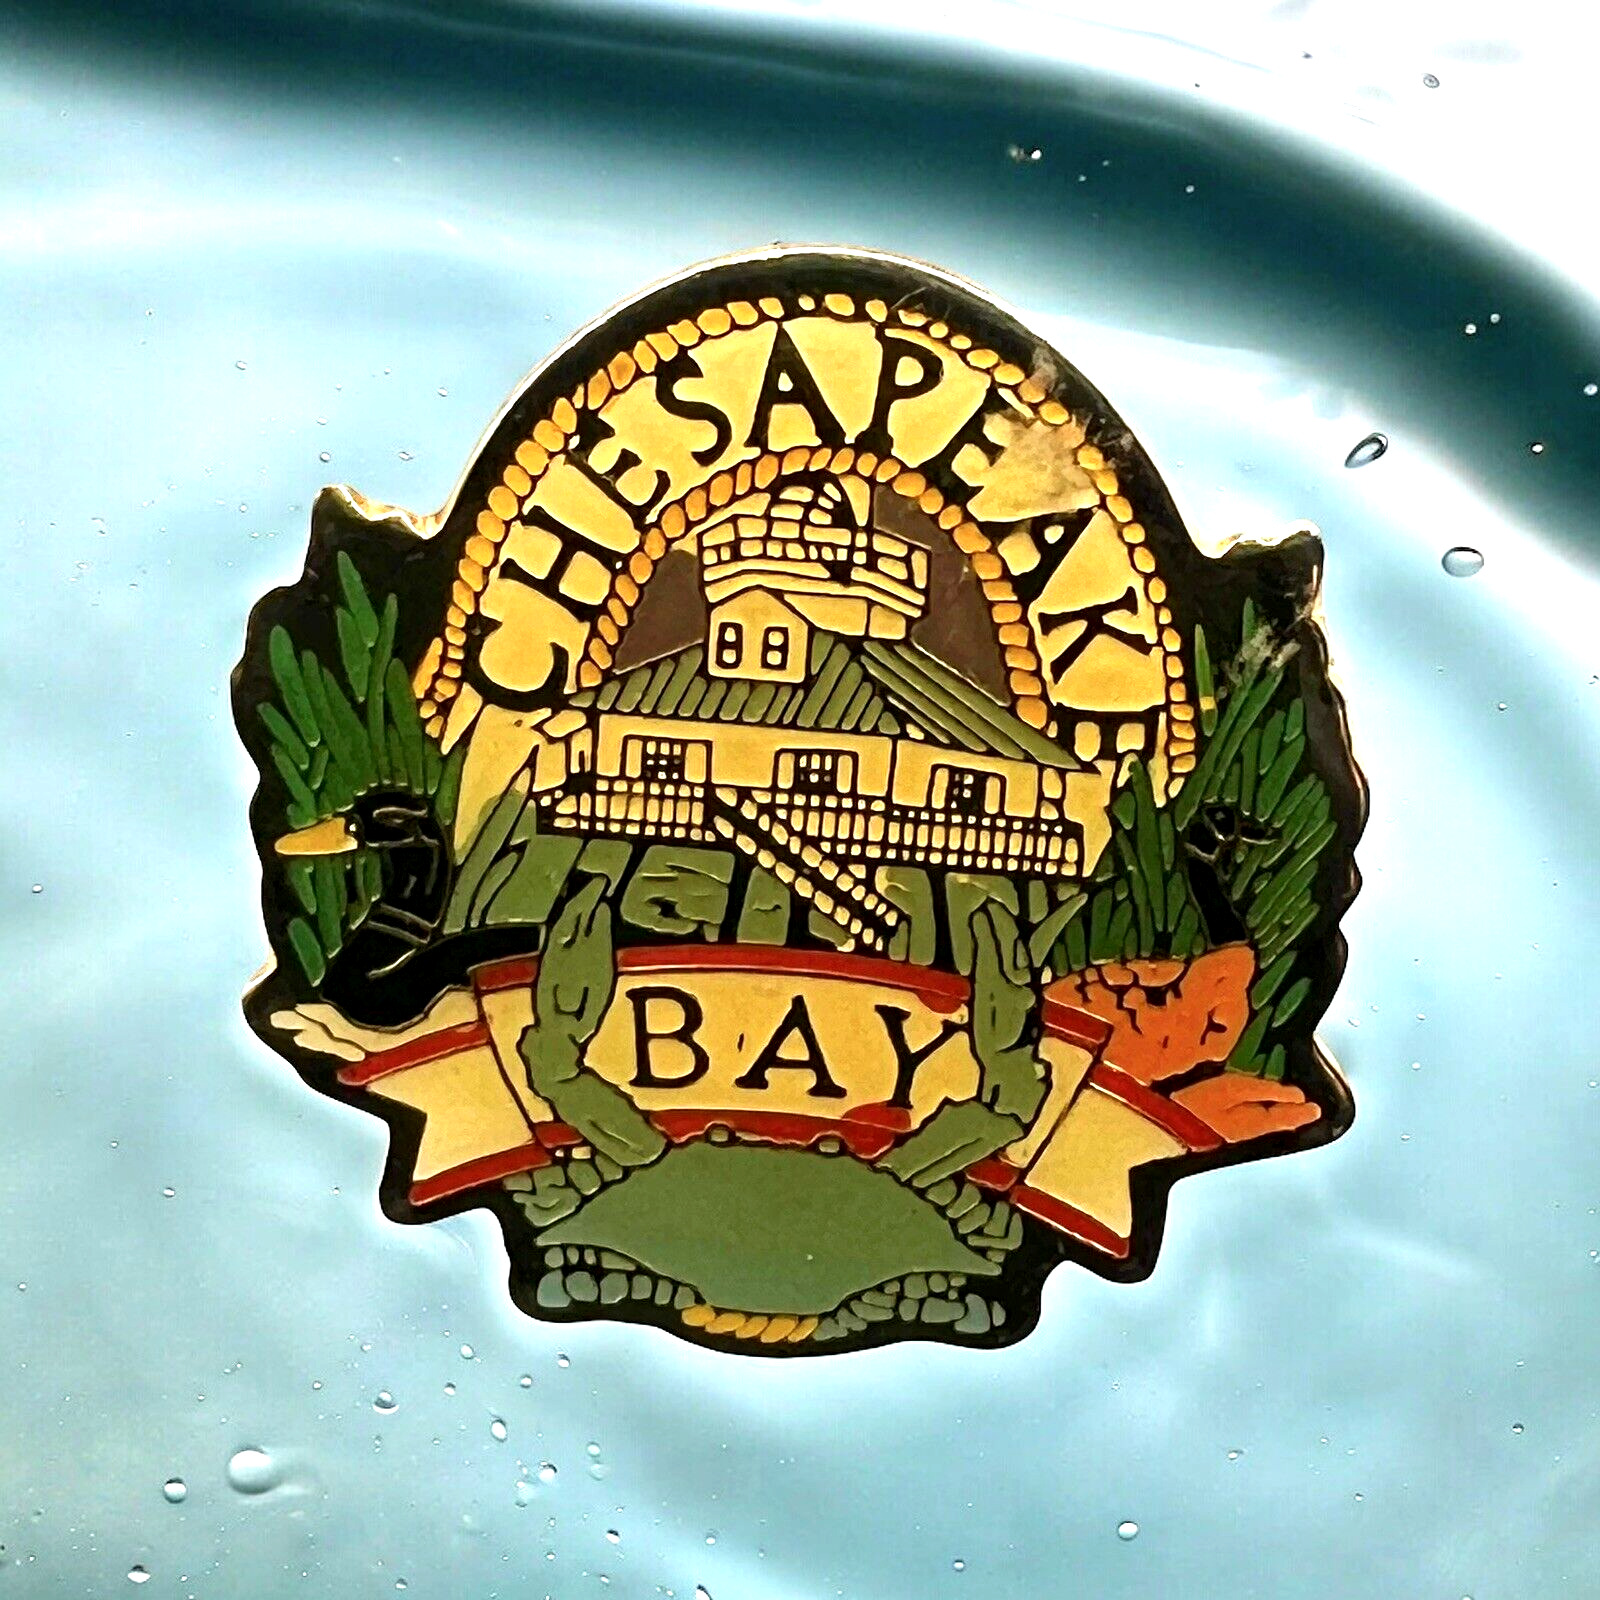 CHESAPEAKE BAY Vintage PIN with LIGHTHOUSE DUCK DECOY CRAB Maryland MD Souvenir